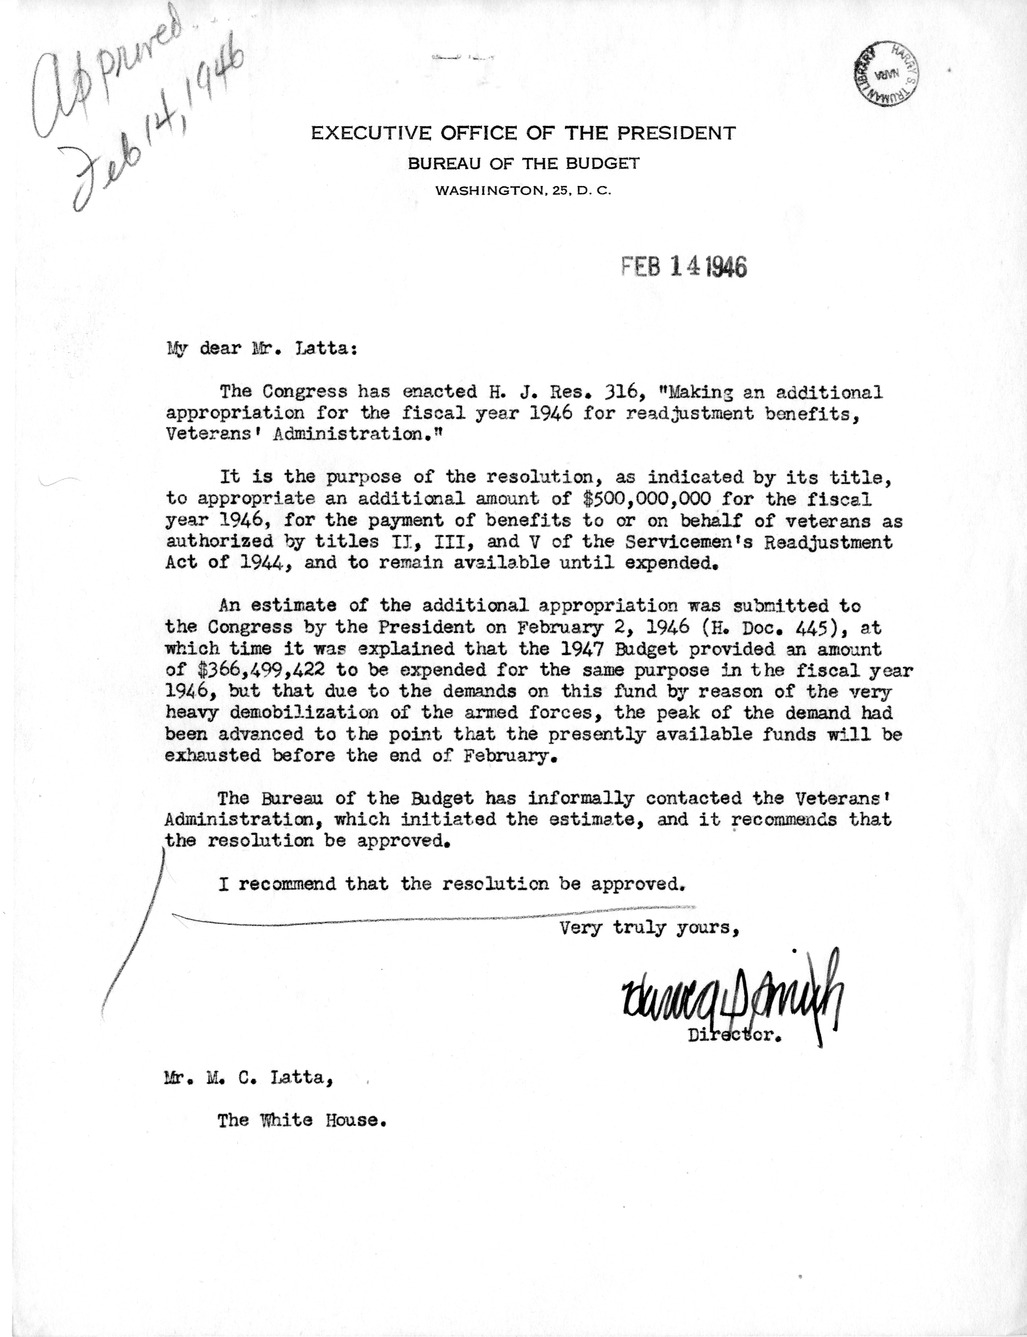 Memorandum from Harold D. Smith to M. C. Latta, H.J. Res. 316, Making an Additional Appropriation for the Fiscal Year 1946 for Readjustment Benefits, Veterans' Administration